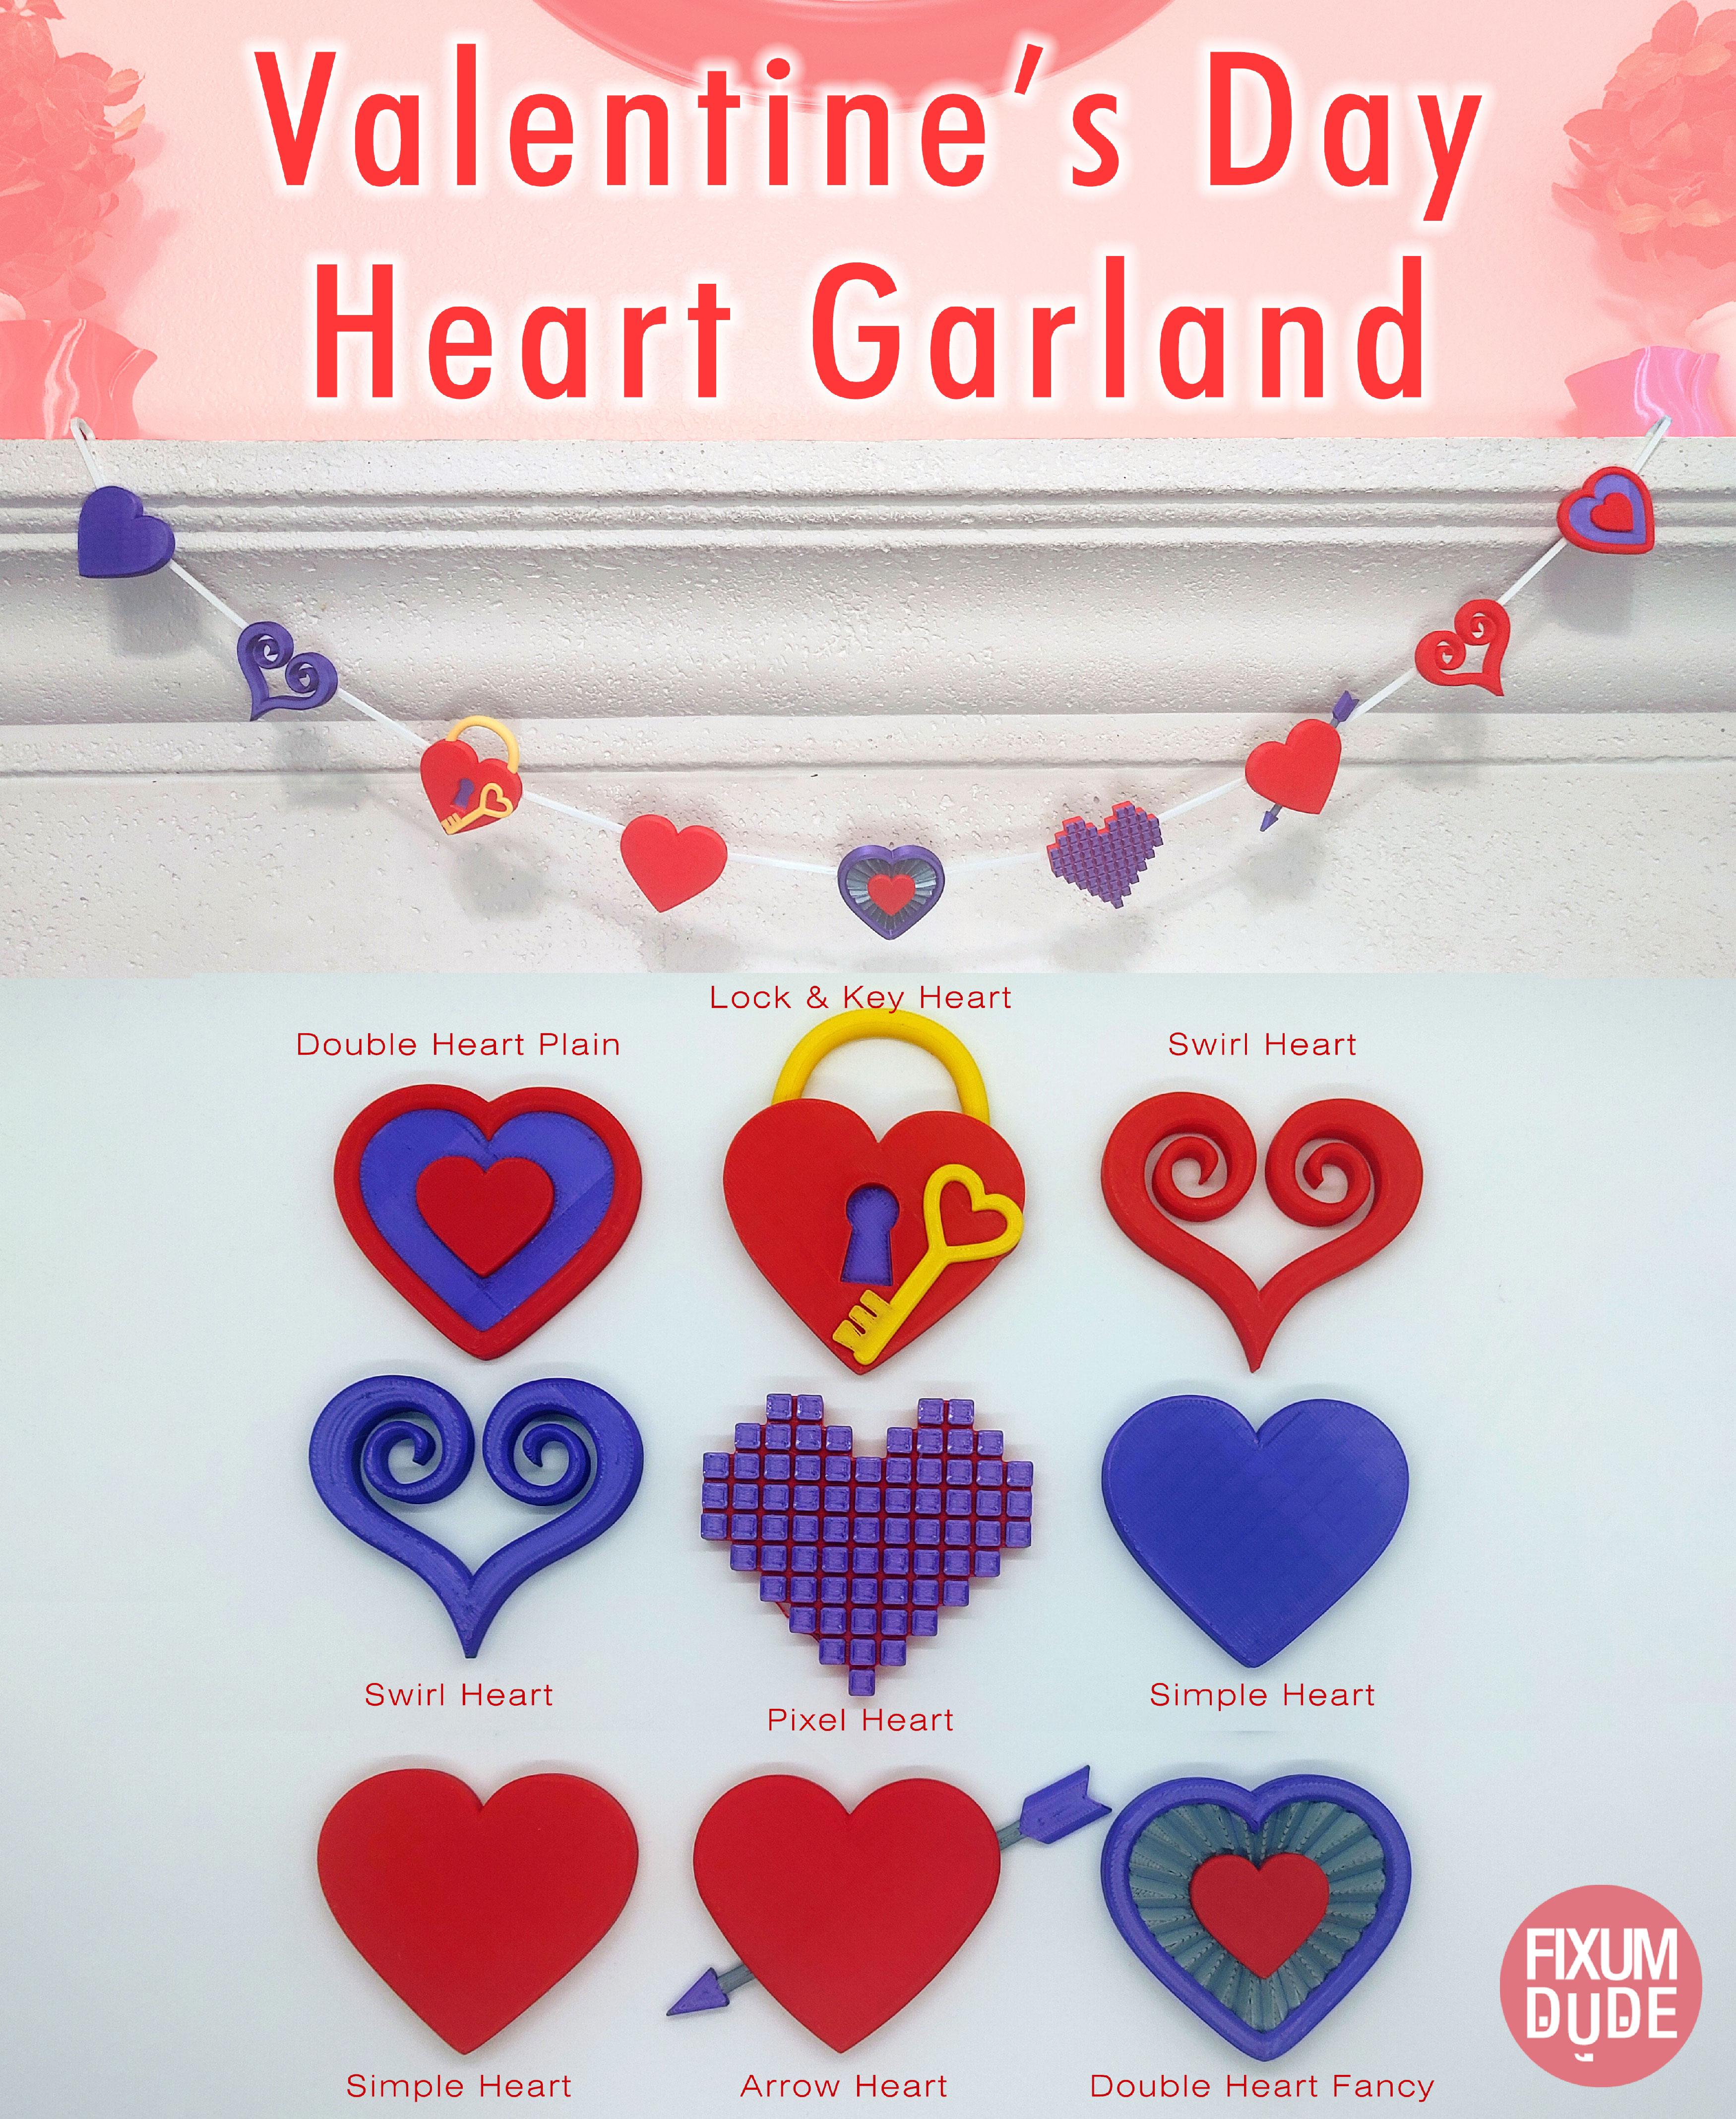  Valentines Hearts Variety Snap Together Garland Decorations 3d model